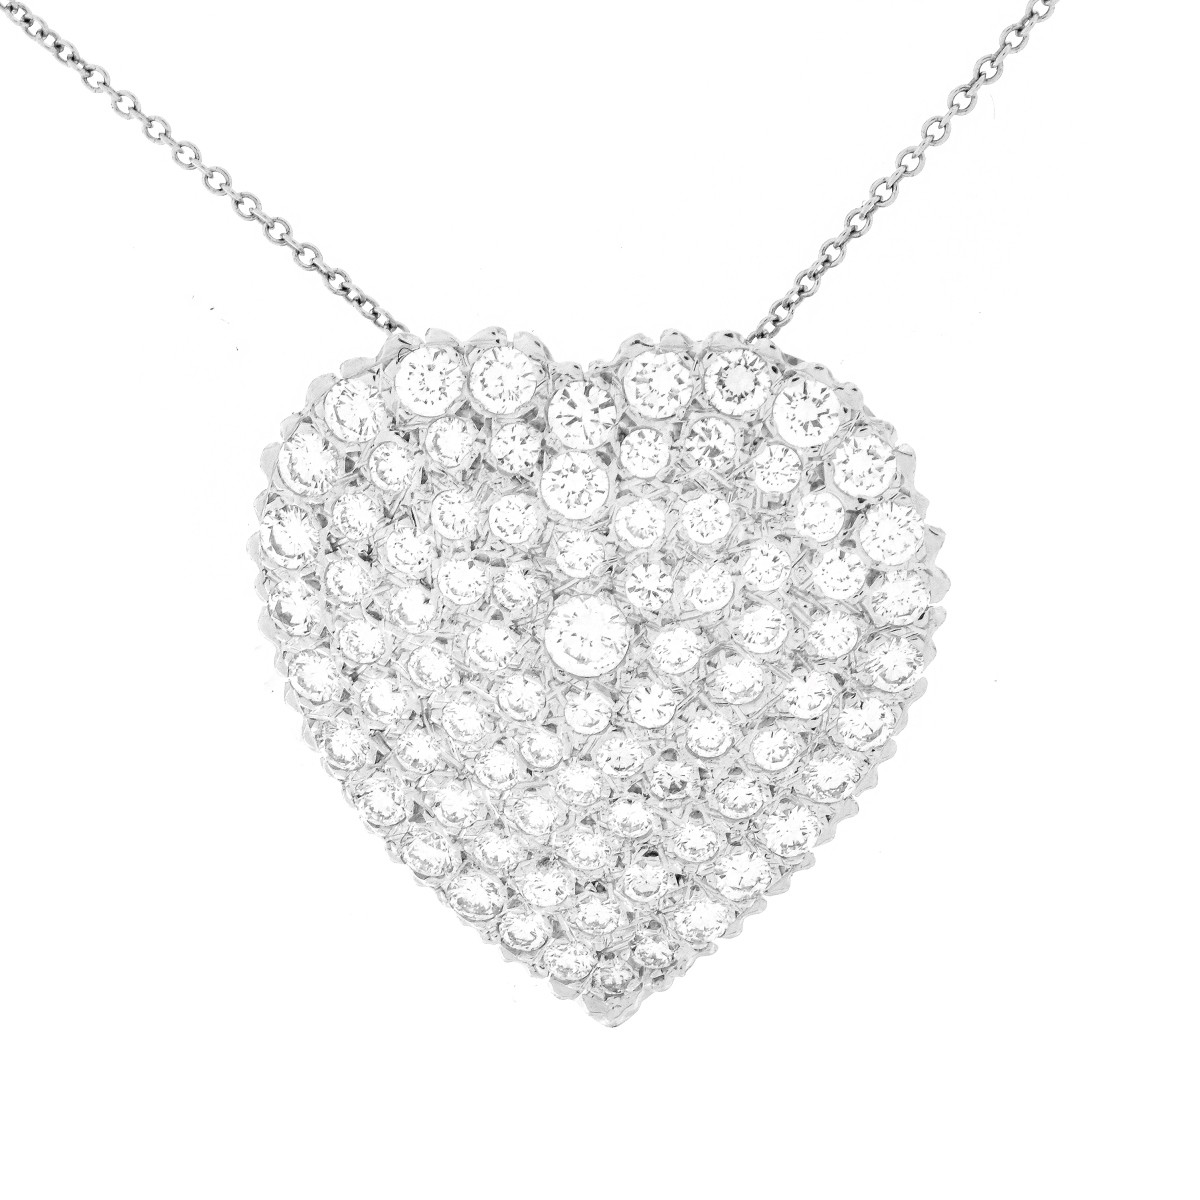 Diamond and 14K Gold Heart Necklace